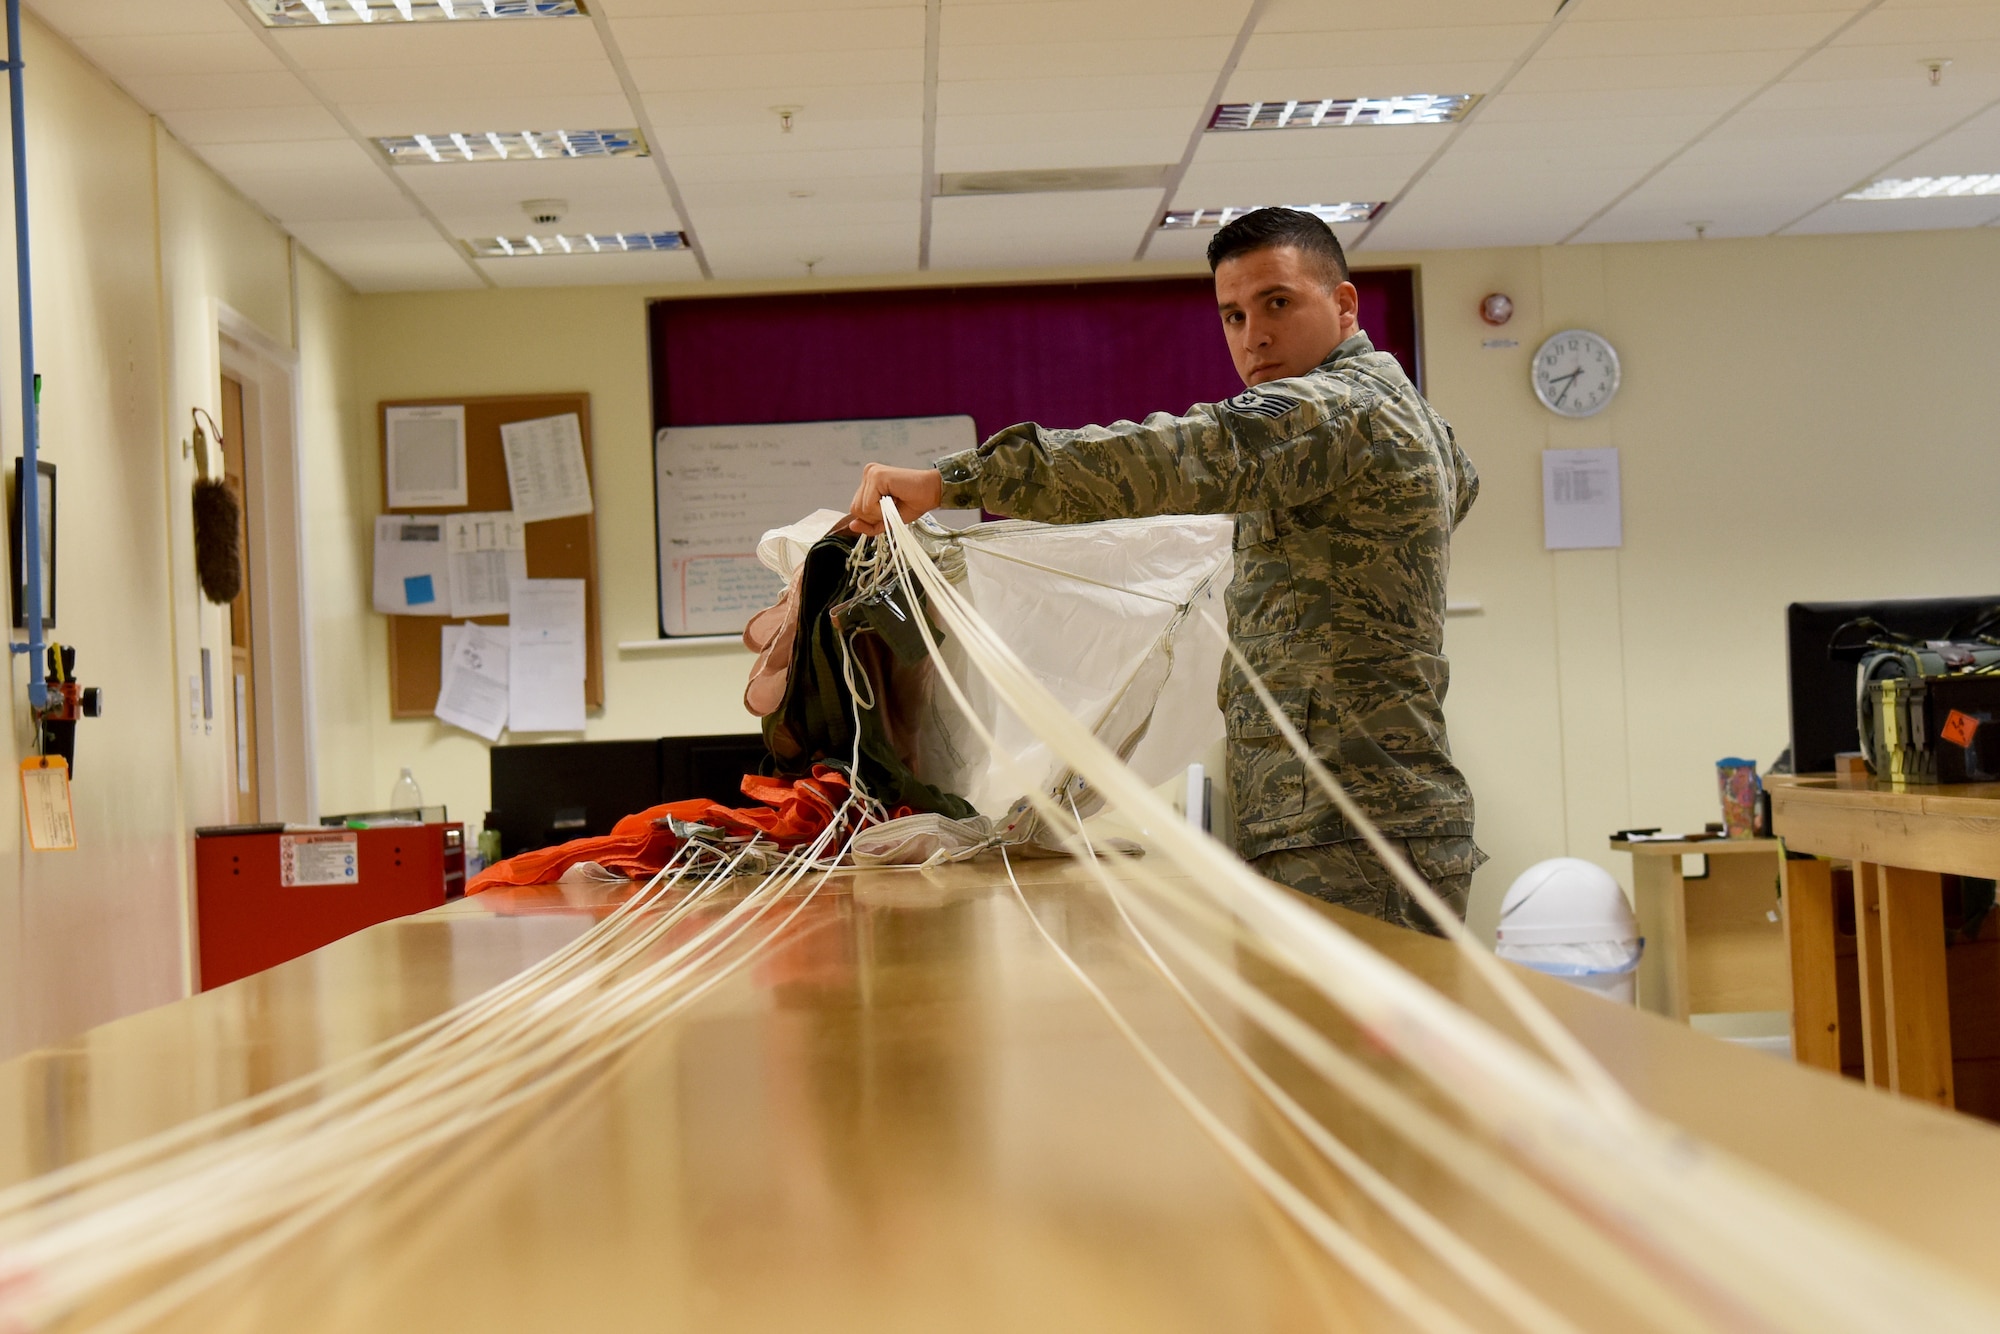 Staff Sgt. Anthony Silva, 48th Operation Support Squadron Aircrew Flight Equipment supervisor, checks to ensure the lines on a parachute are not tangled at Royal Air Force Lakenheath, England, Sept. 13, 2018. Every unique piece of gear, from G-Suits to helmets, communications and survival rations, is carefully maintained by Liberty Aircrew Flight Equipment Airmen, ensuring that aircrews are outfitted for any situation they may face in the air, land or sea. (U.S. Air Force photo/ Senior Airman John A. Crawford)